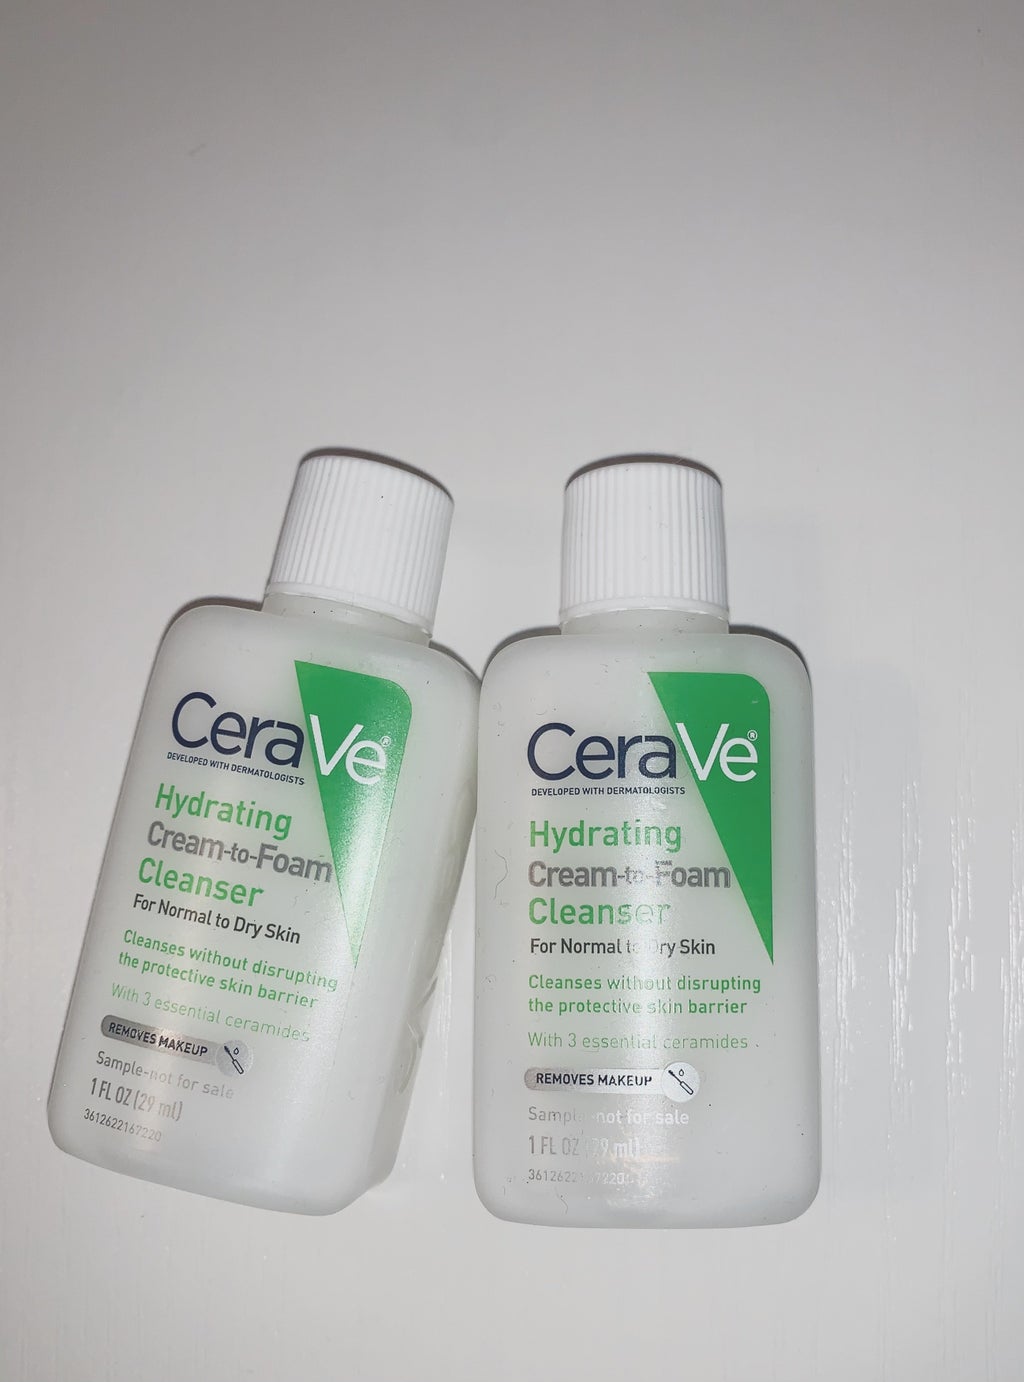 Cerave hydrating cream to foam cleansers against white background